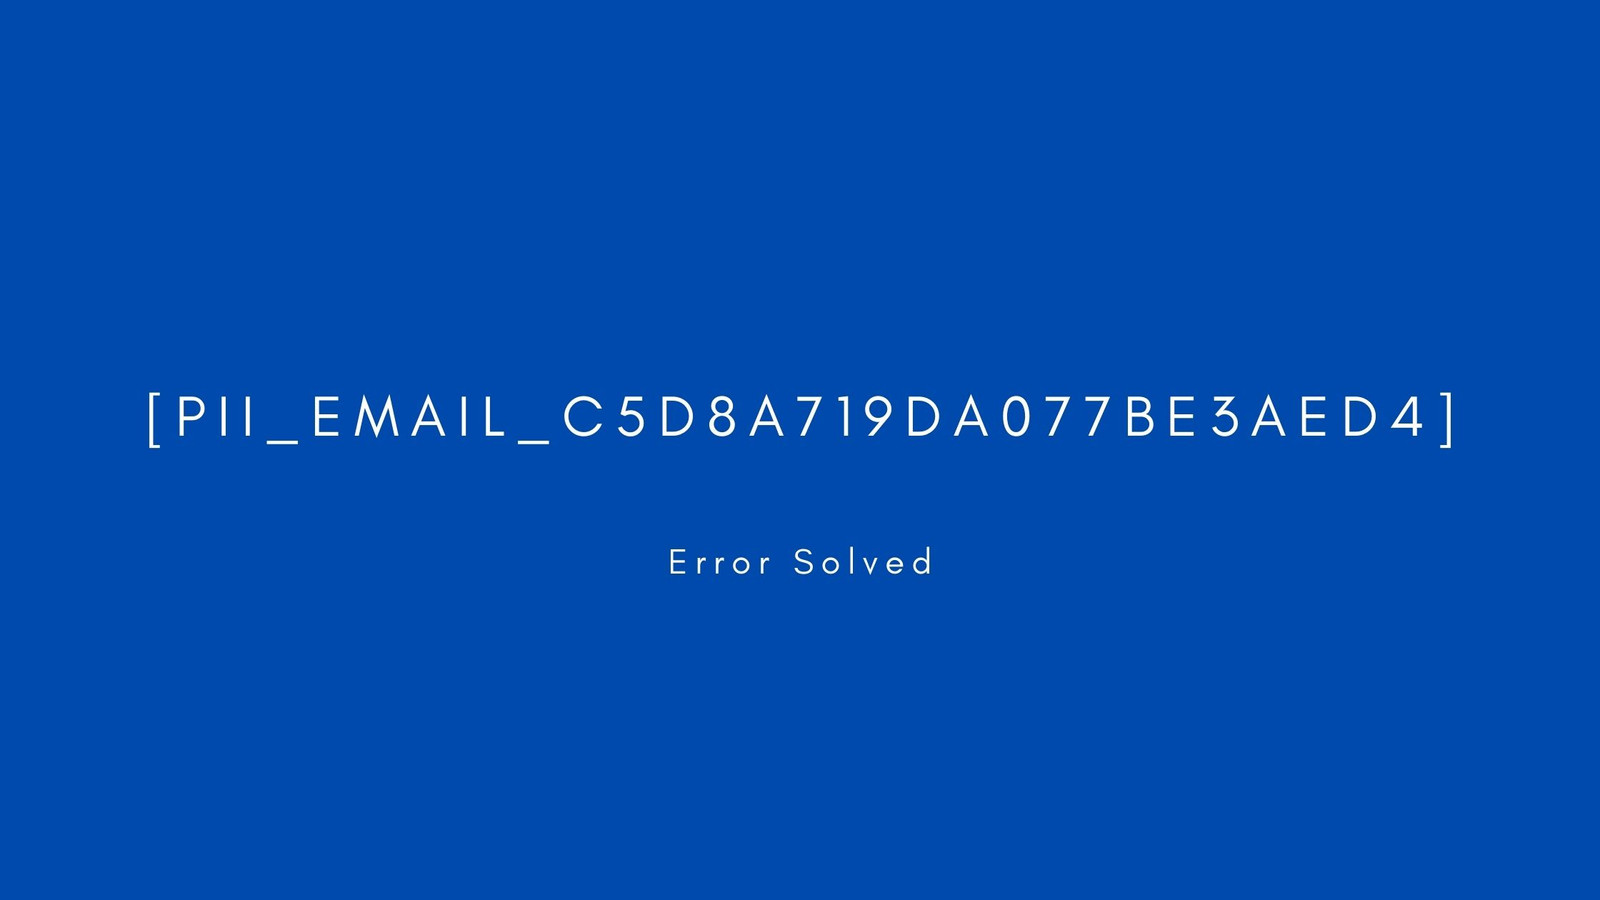 [pii_email_c5d8a719da077be3aed4] Error resolved